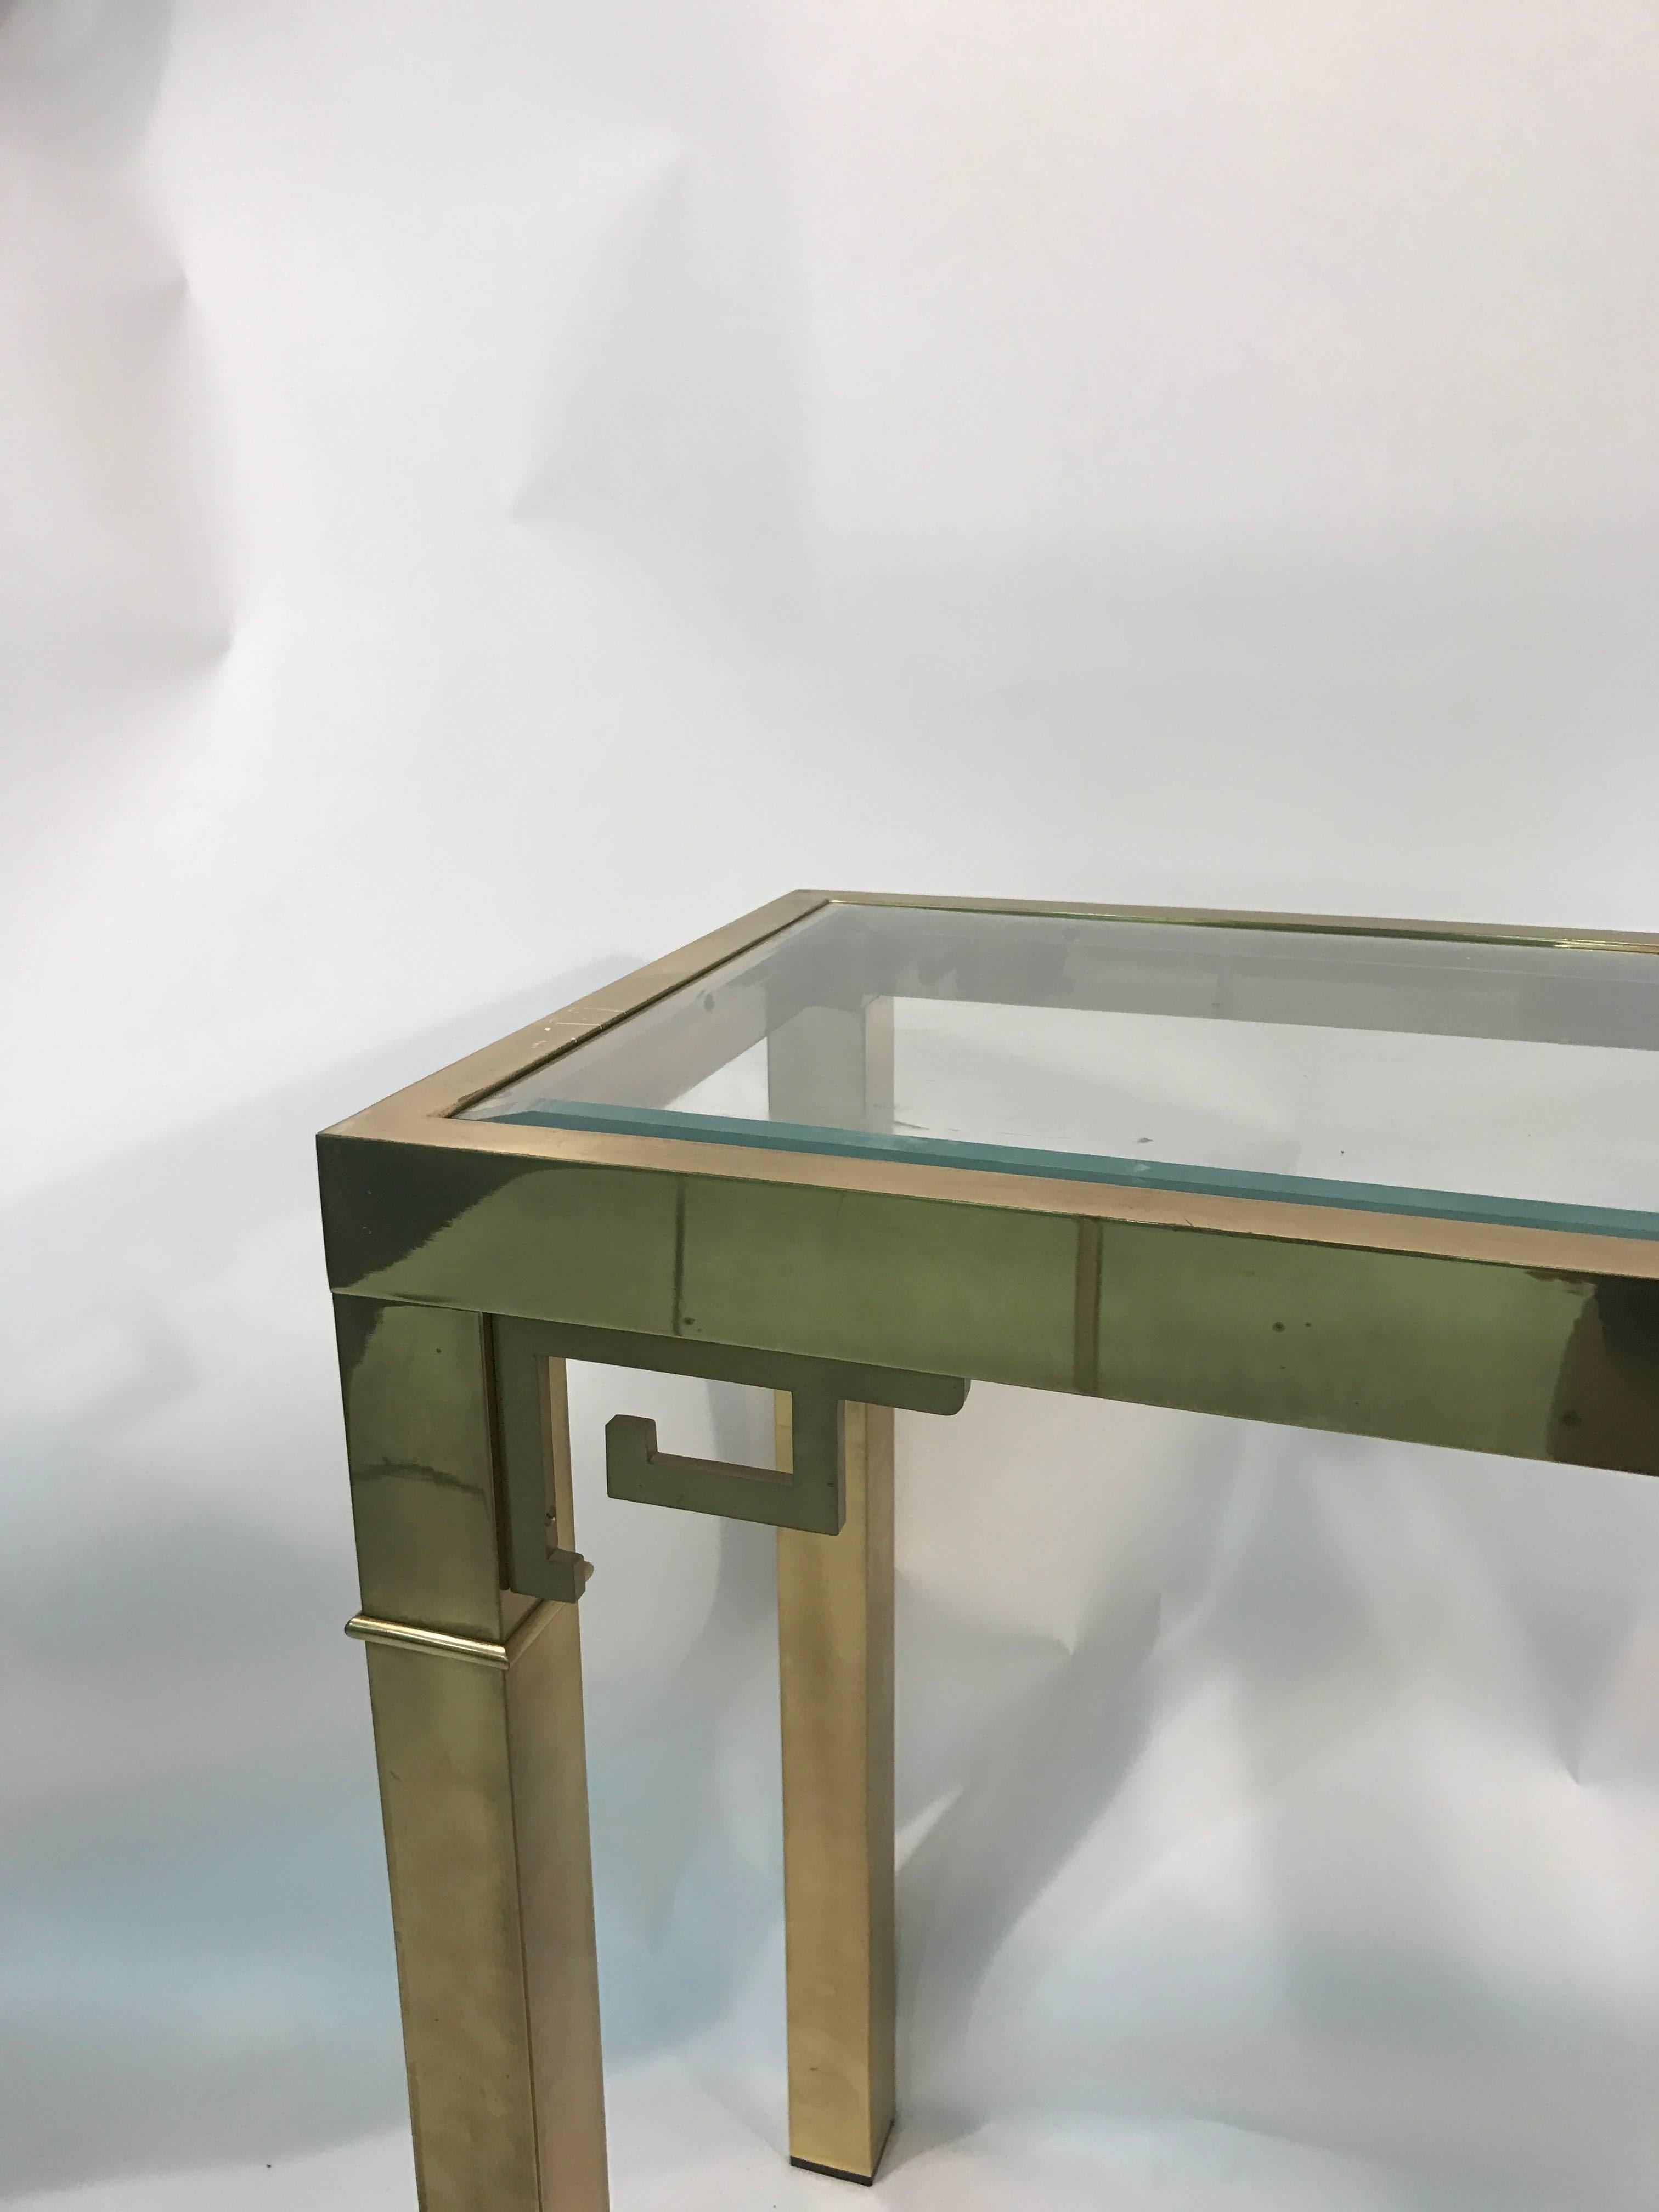 Stunning Solid Brass Italian Mirror and Console Table with Greek Key Design For Sale 3